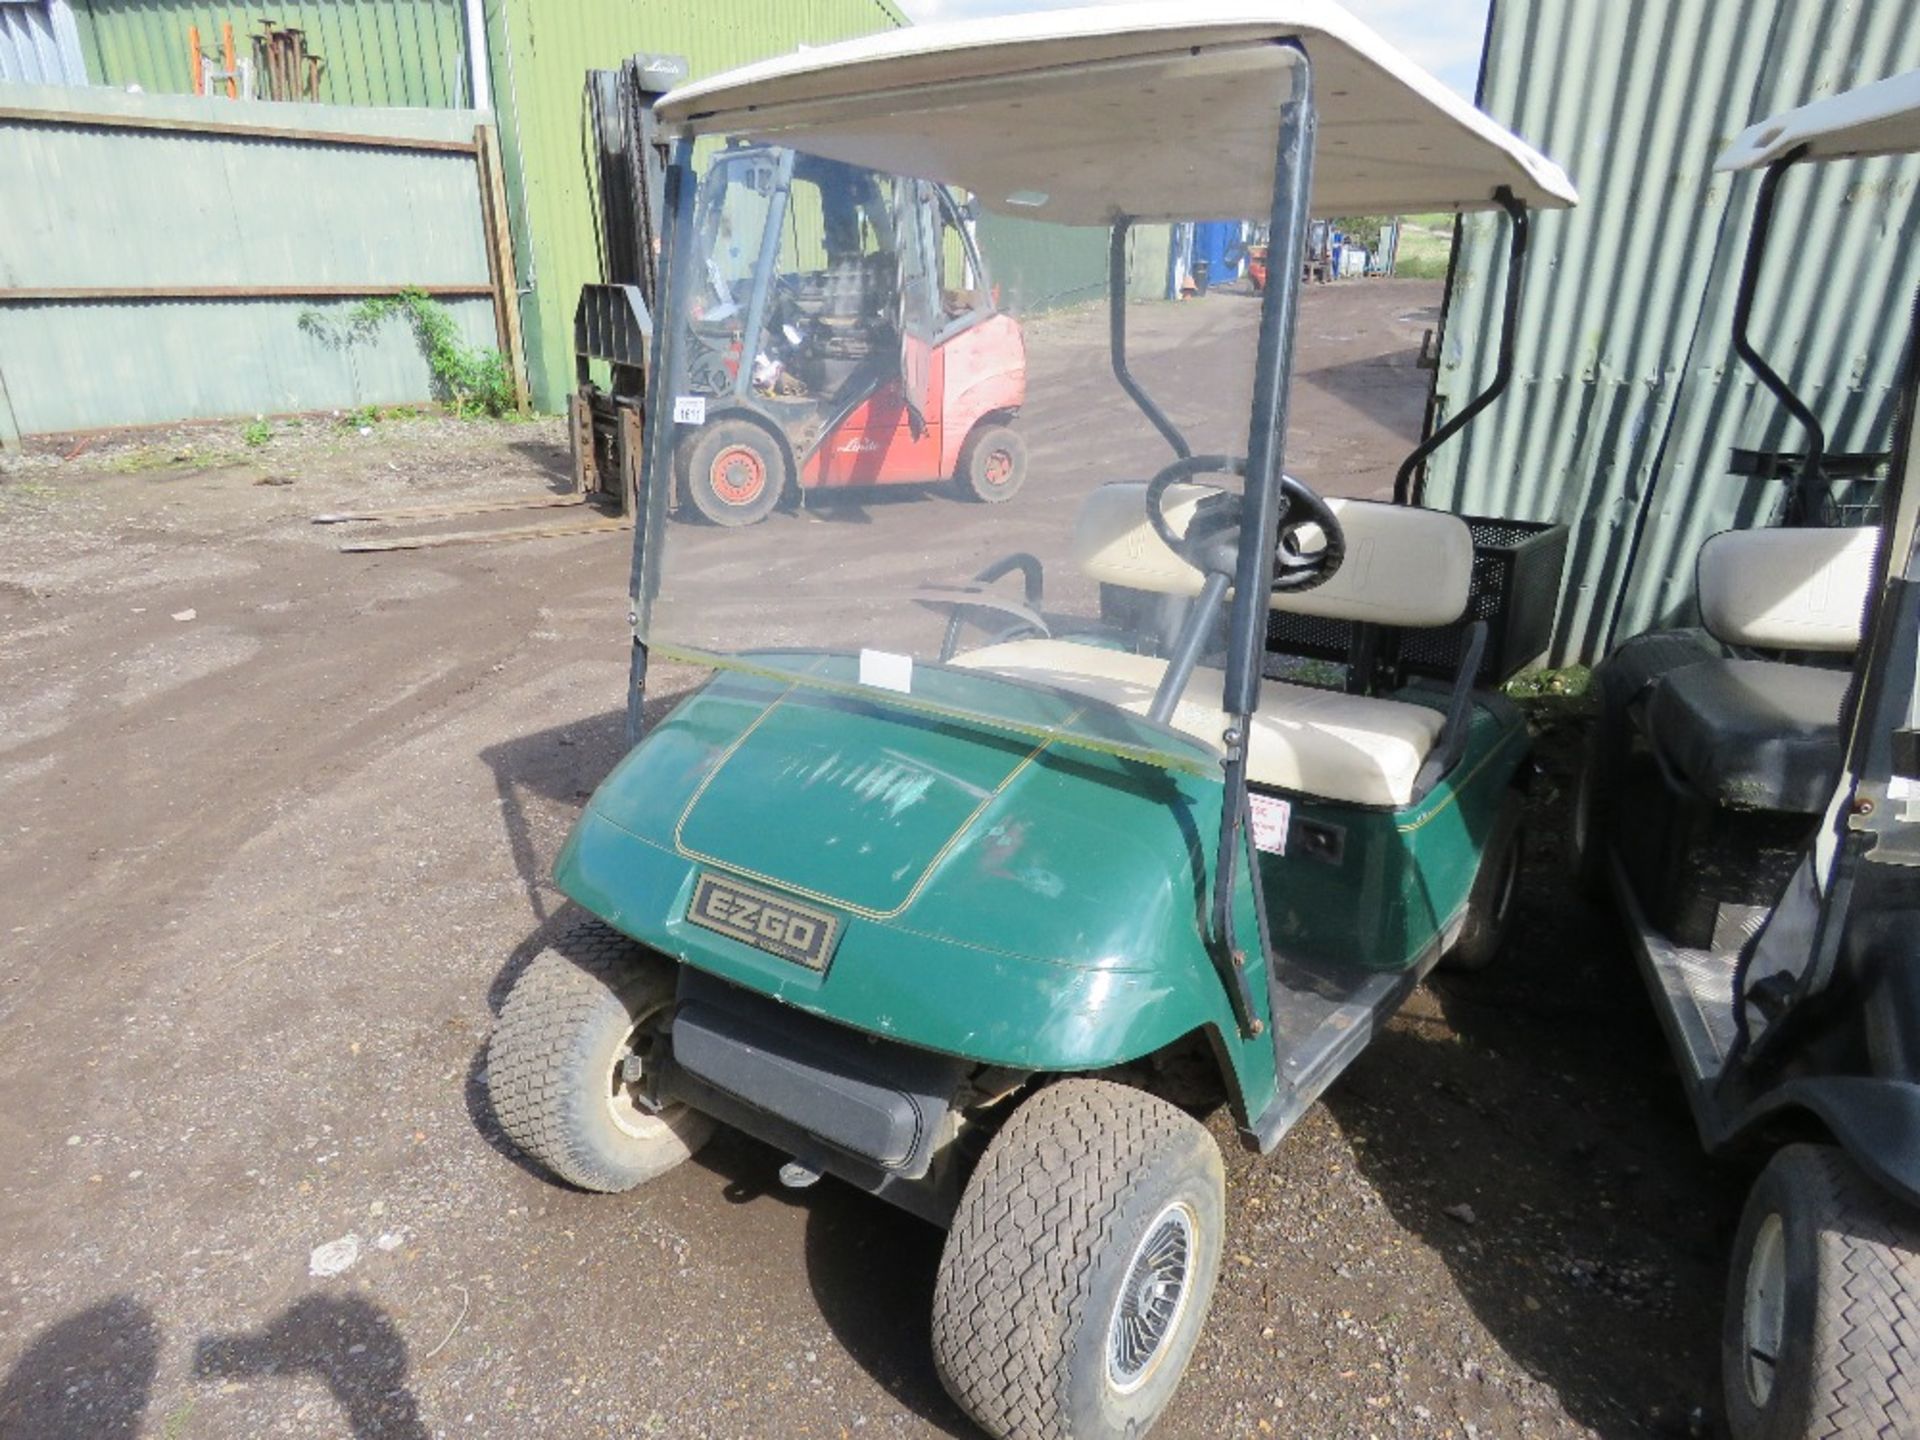 EZGO PETROL ENGINED GOLF BUGGY. GREEN COLOURED. WHEN TESTED WAS SEEN TO RUN, DRIVE, STEER AND BRAKE - Image 3 of 8